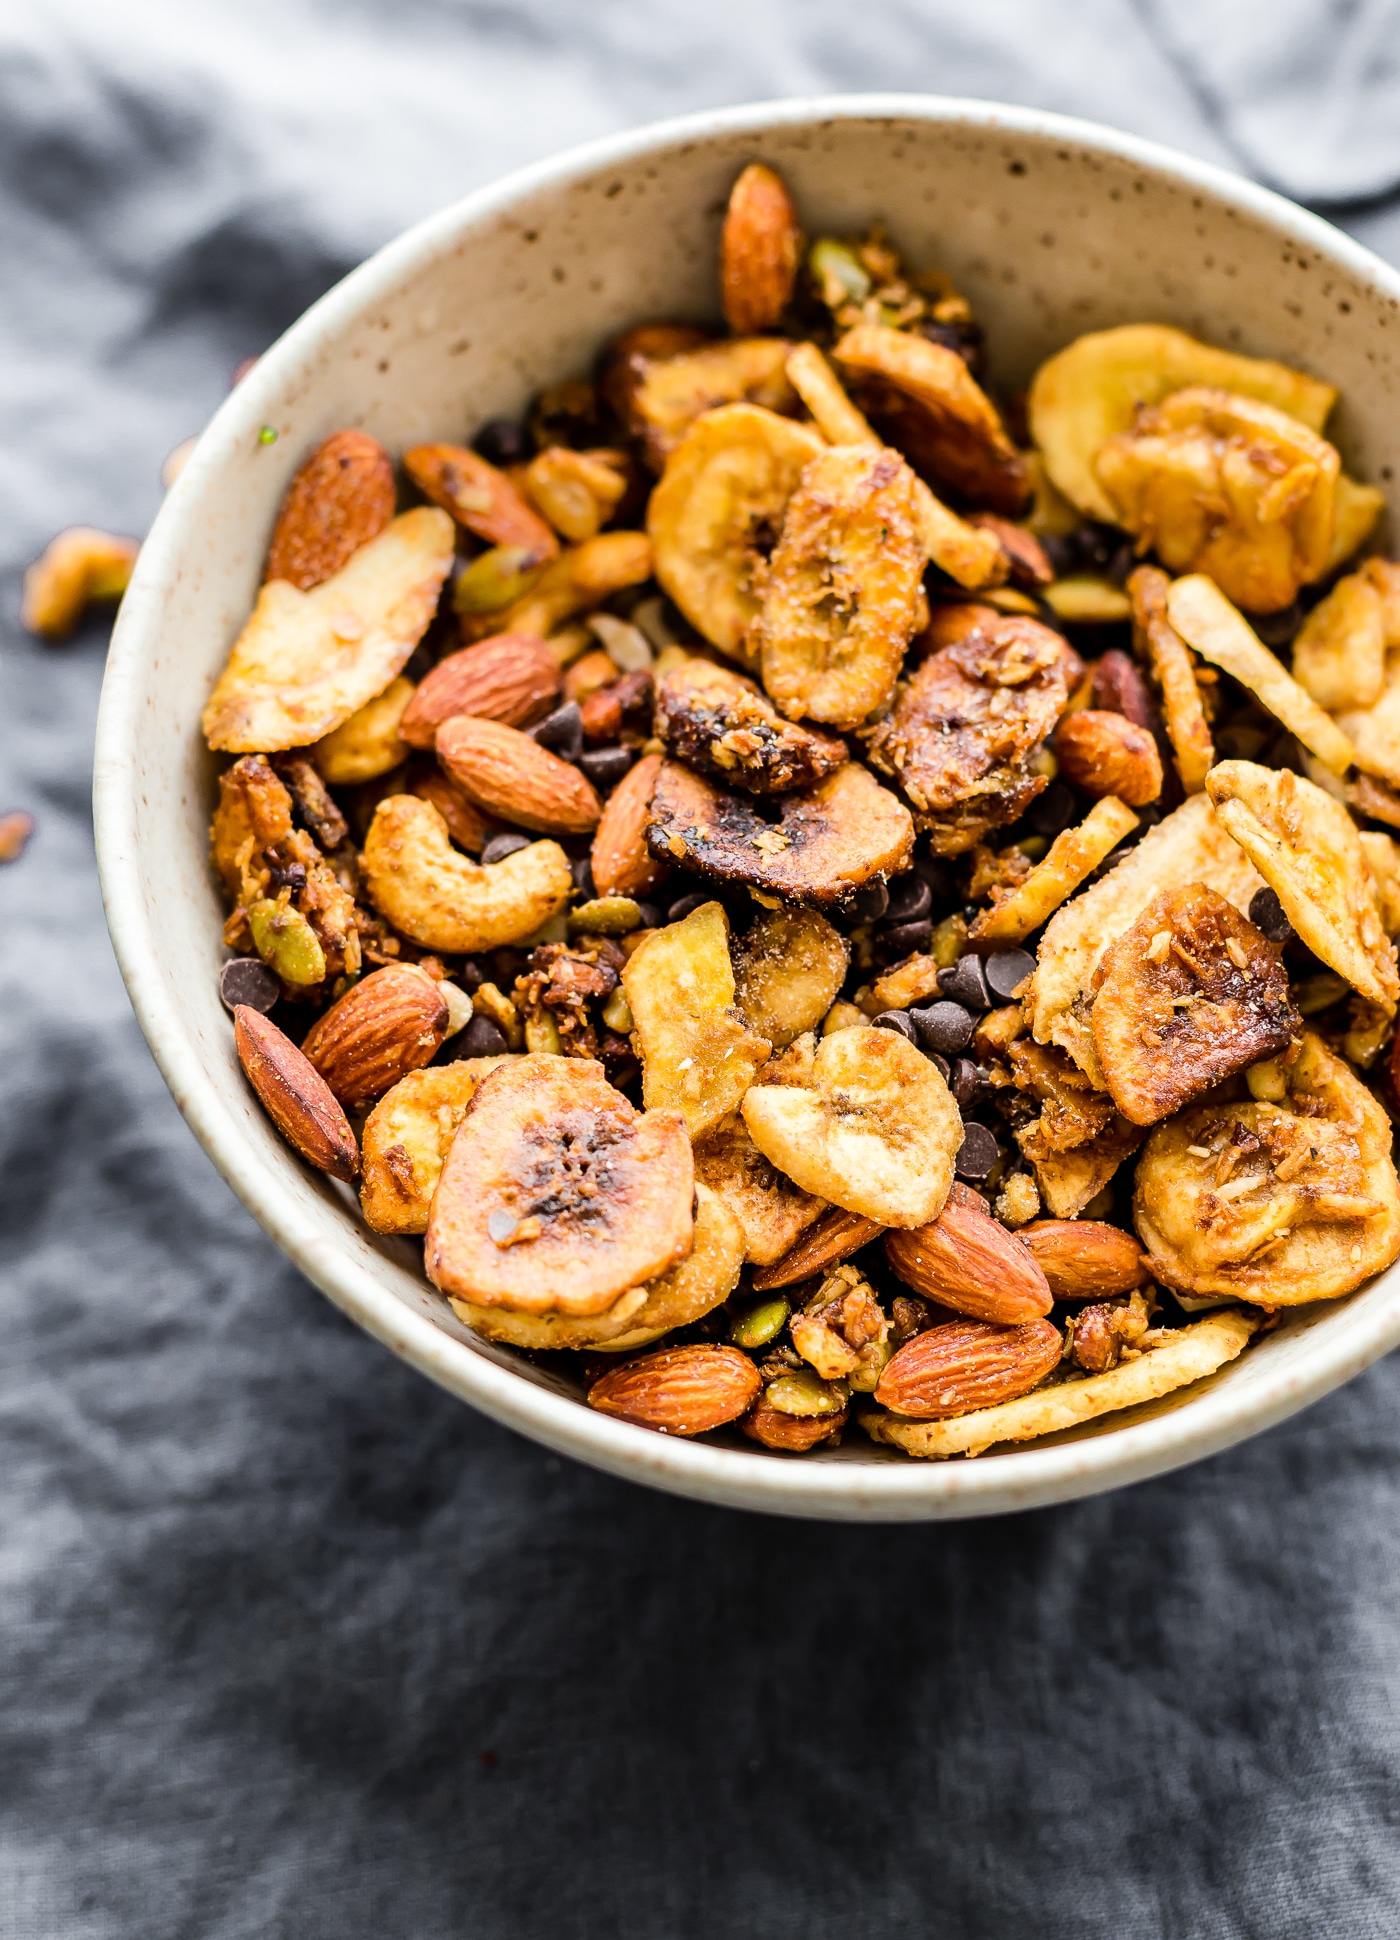 A bowl of homemade trail mix with banana chips, almonds, and chocolate chunks is close-up on a textured grey cloth.